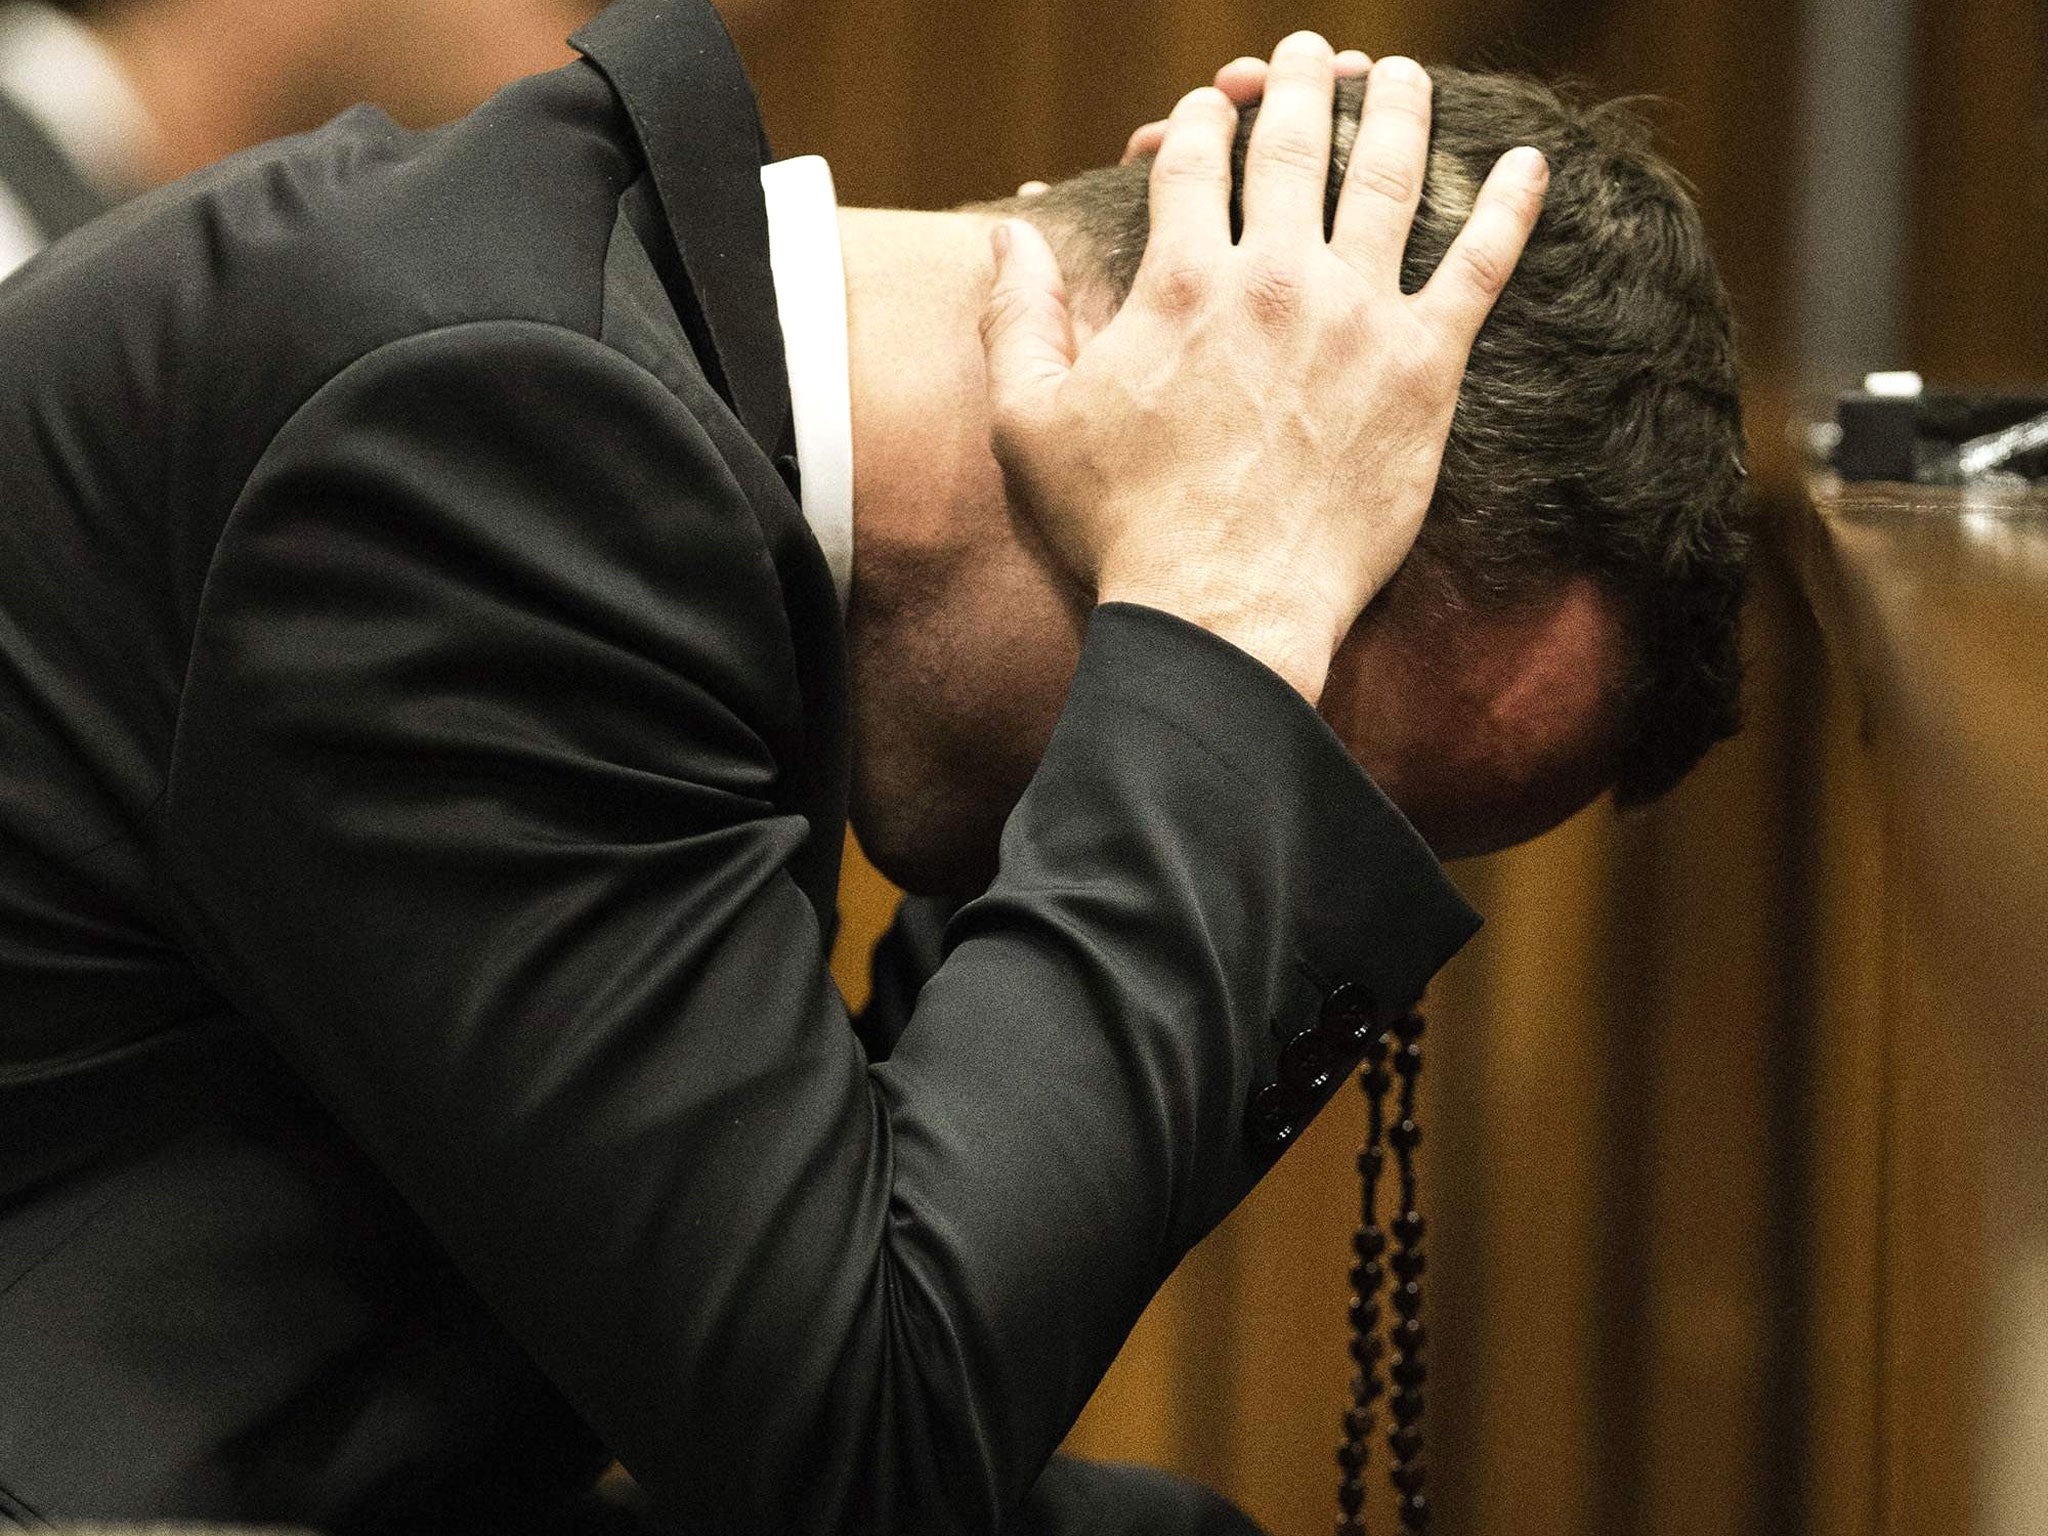 Oscar Pistorius puts his hands to his head while a witness testifies and speaks about the morning of the shooting of his girlfriend Reeva Steenkamp